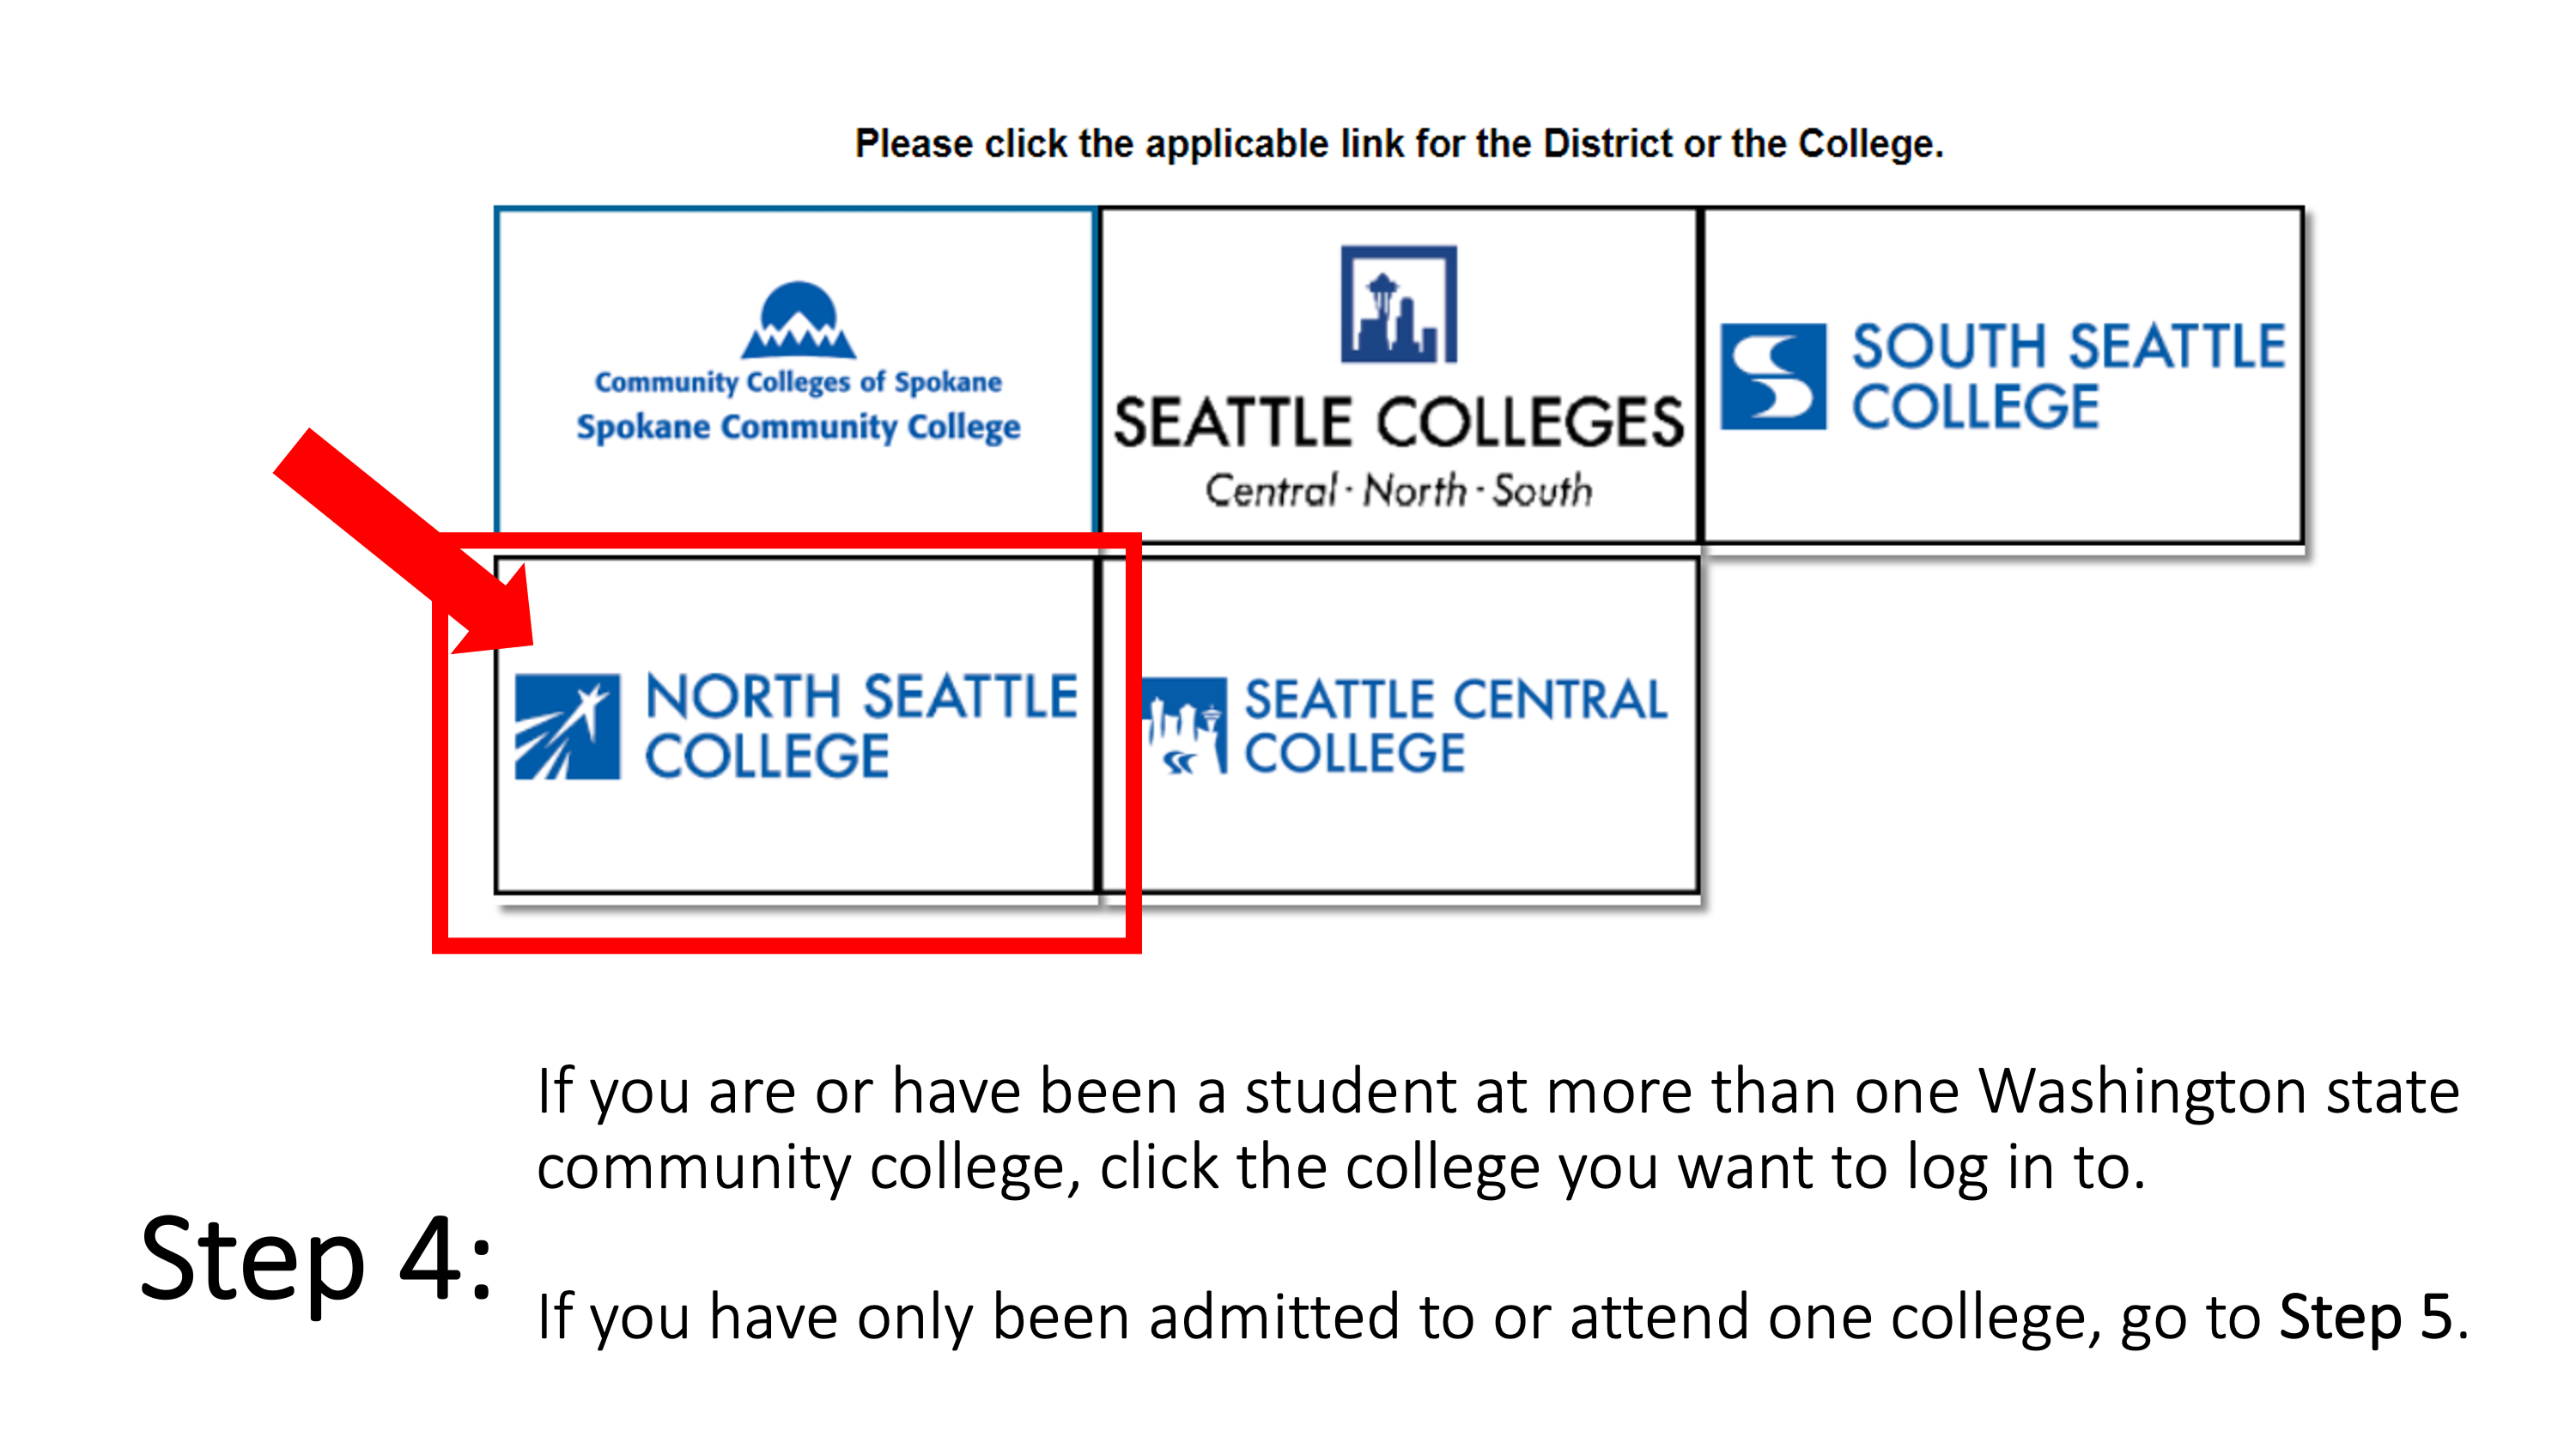  If you are or have been a student at more than one Washington state community college, click the college you want to log in to. If you have only been admitted to or attend one college, go to Step 5.